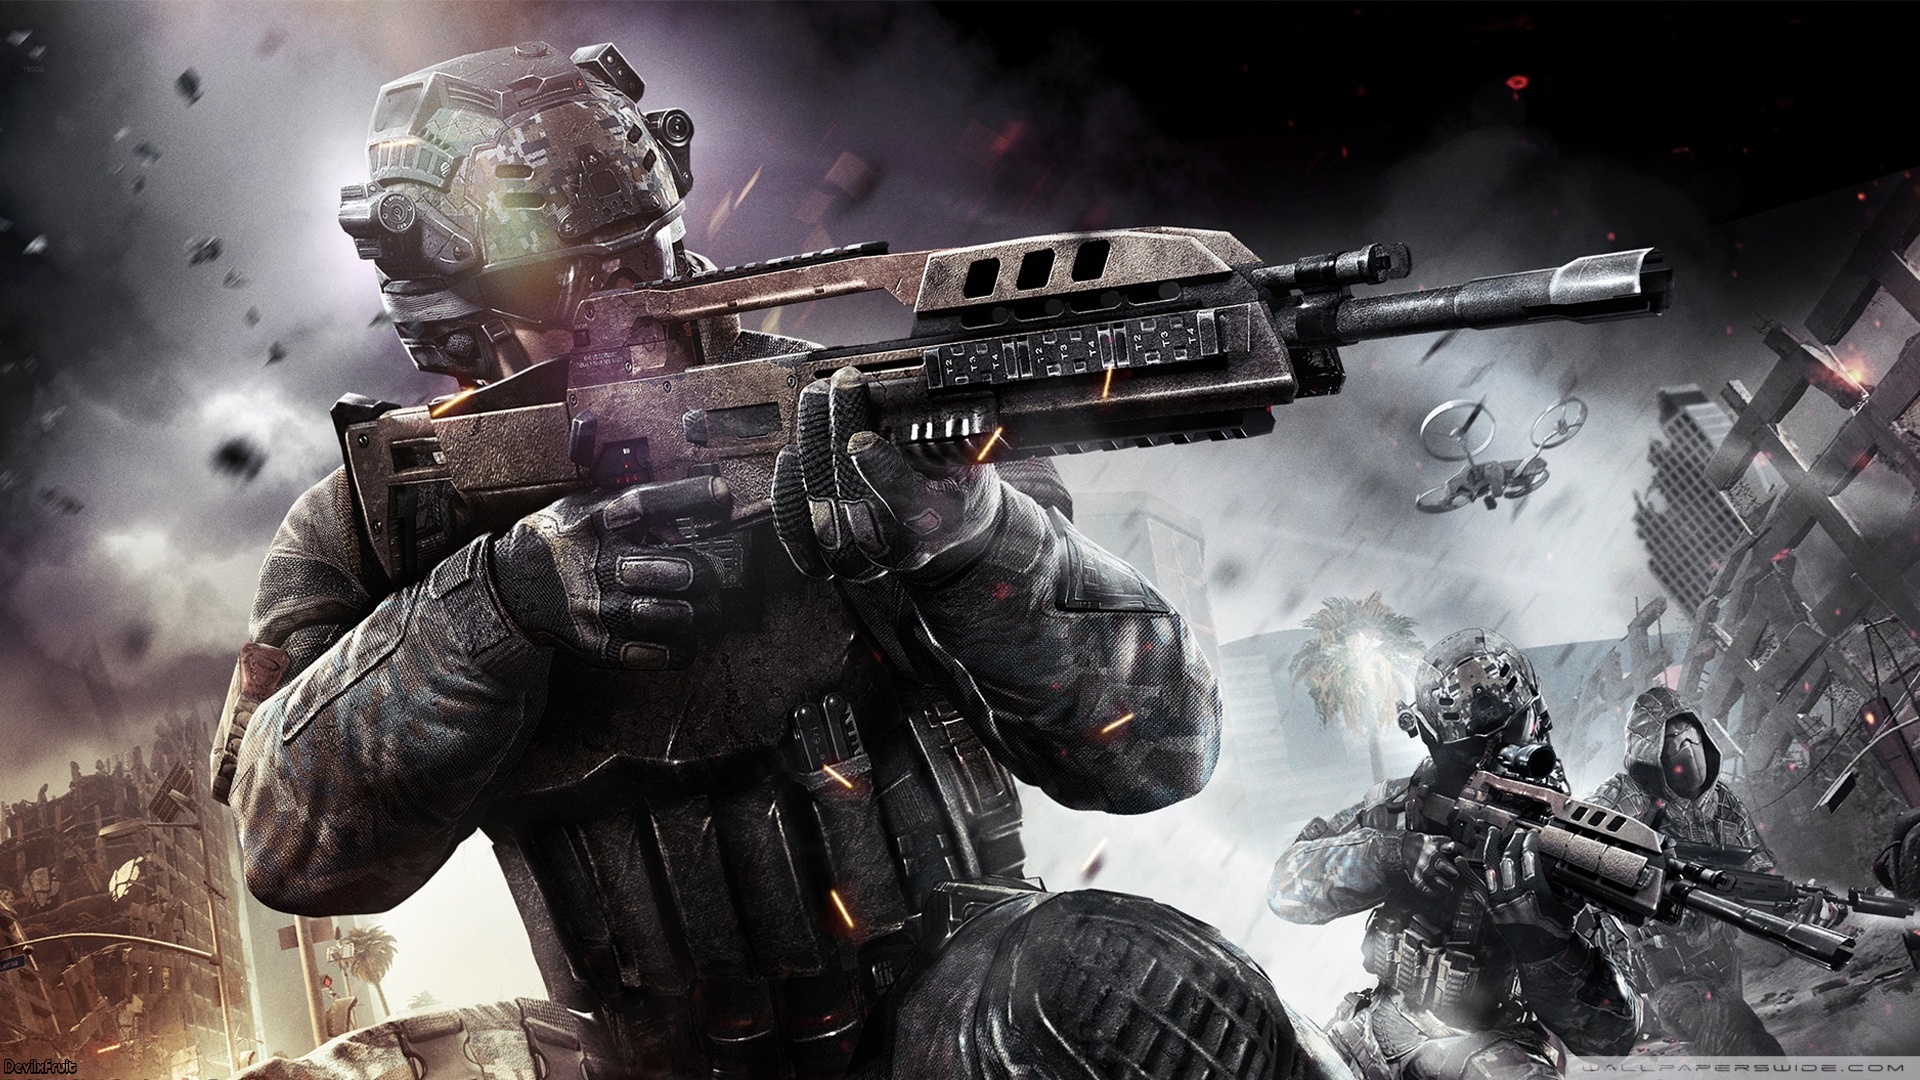  Black Ops 2 HD Wallpaper Collection